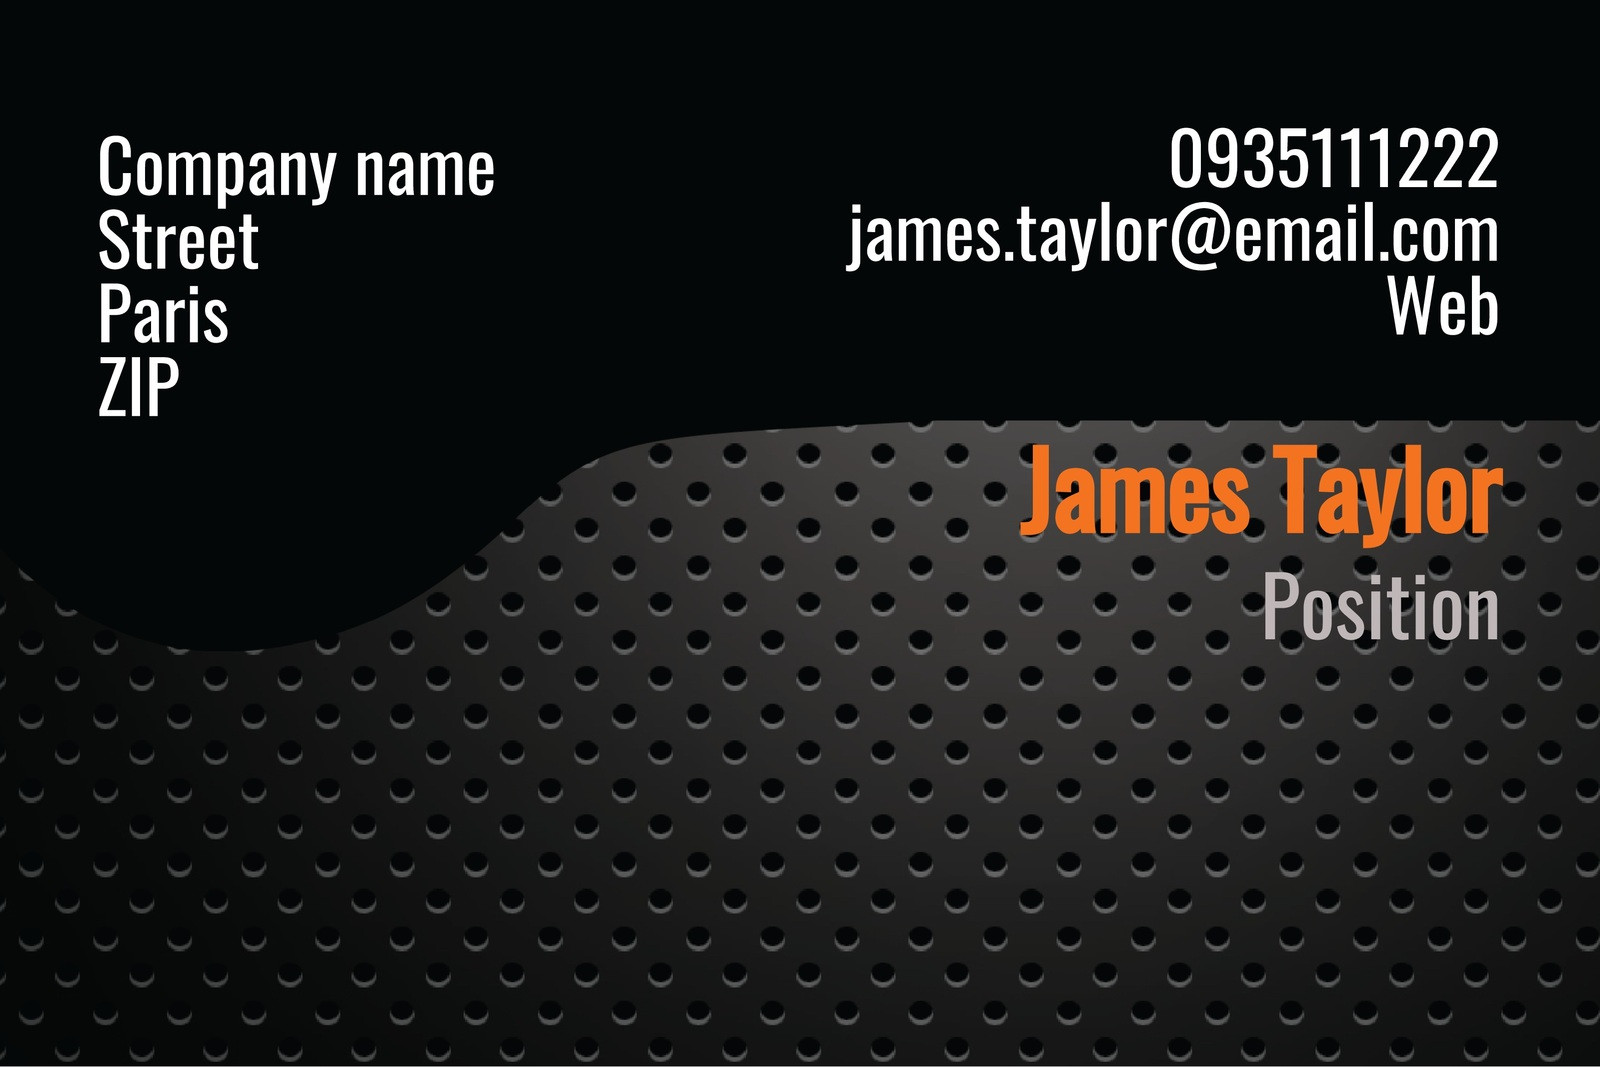 Printing business cards online